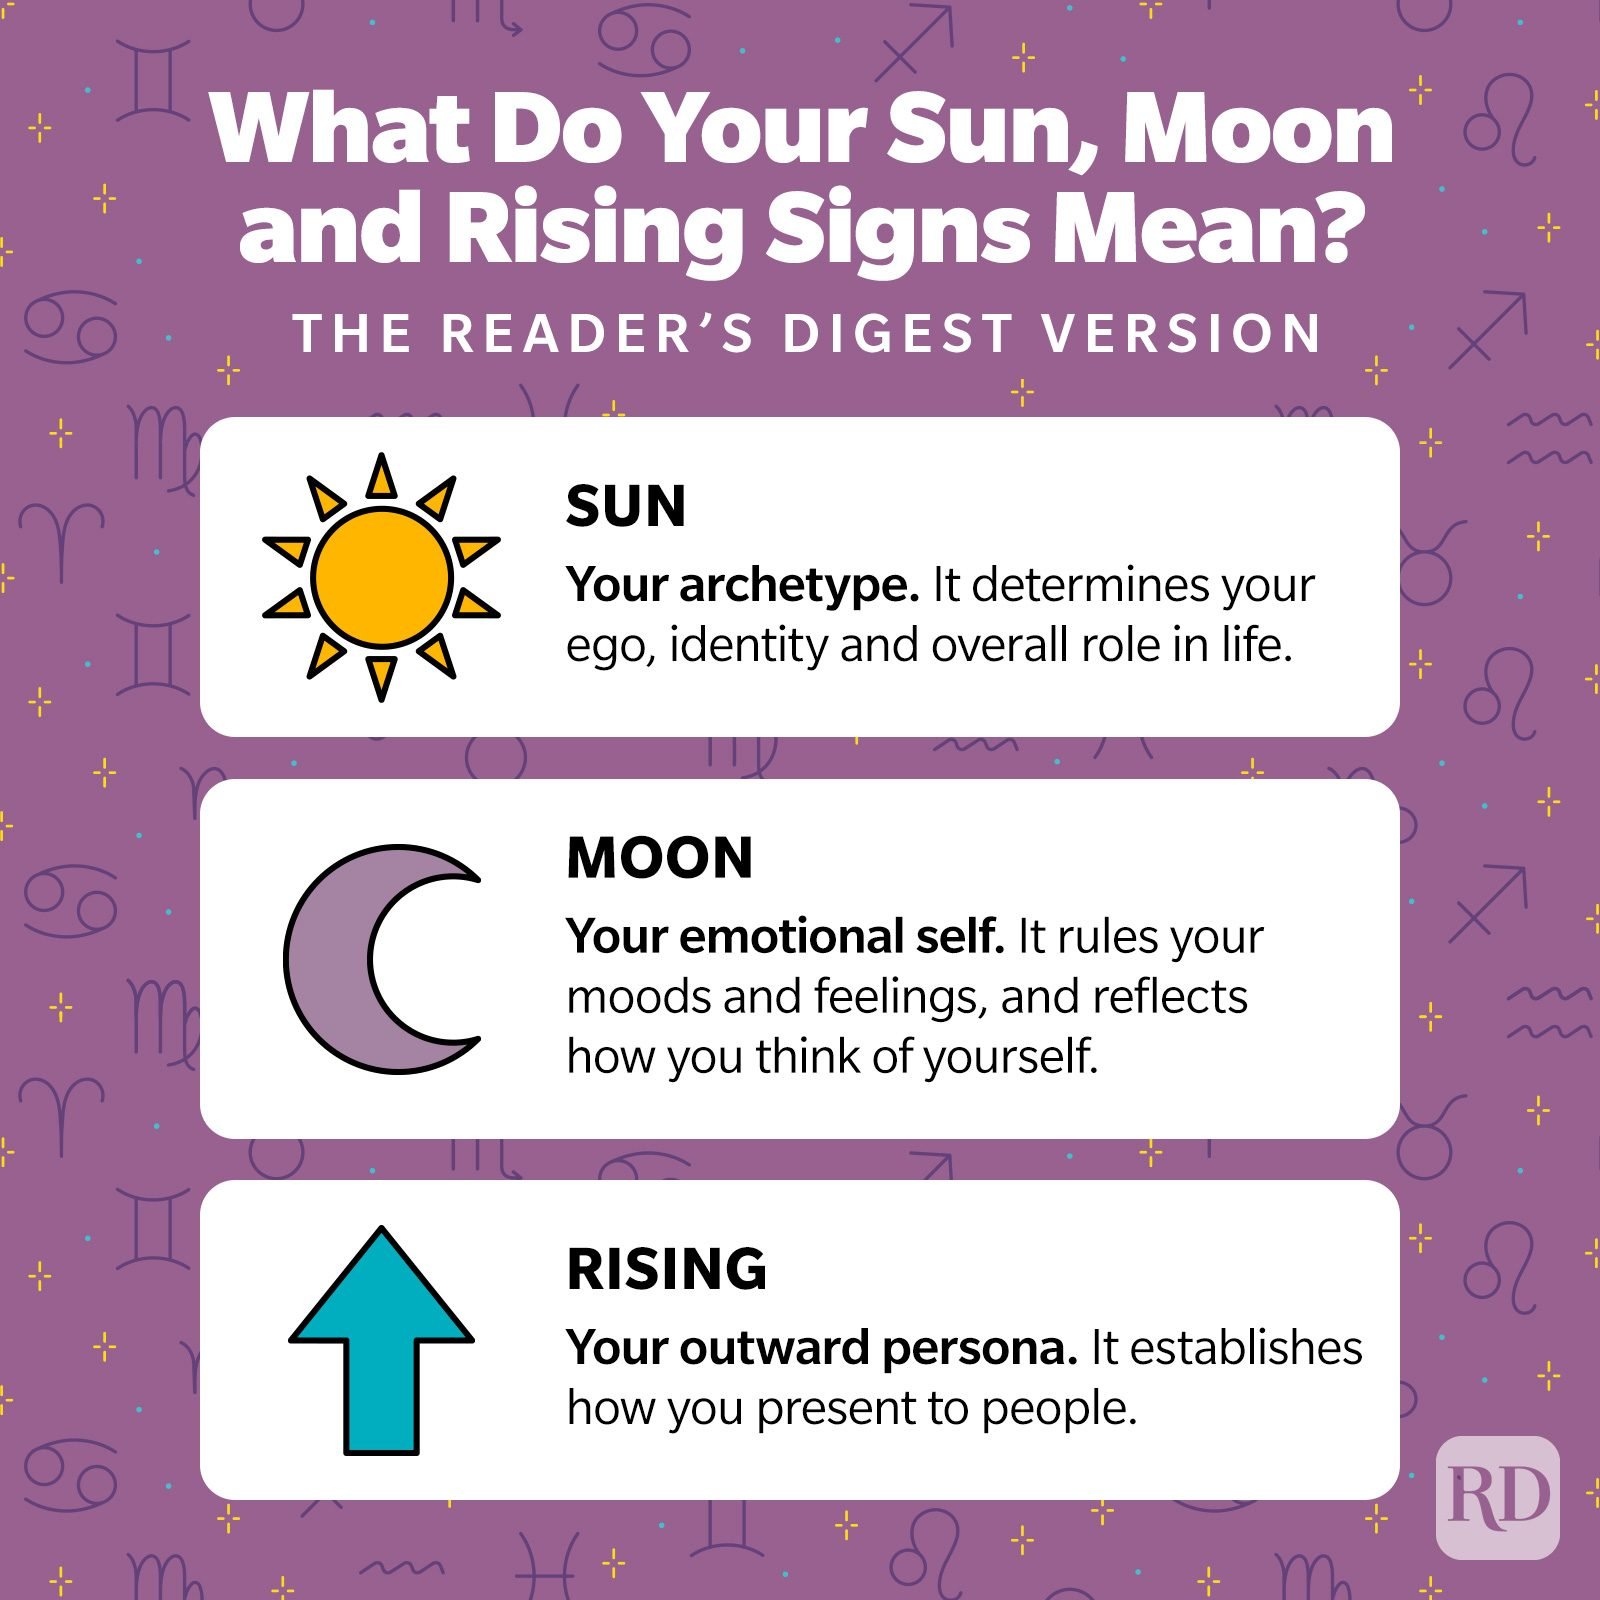 How to Find Your Sun, Moon, and Rising Signs to Better Understand